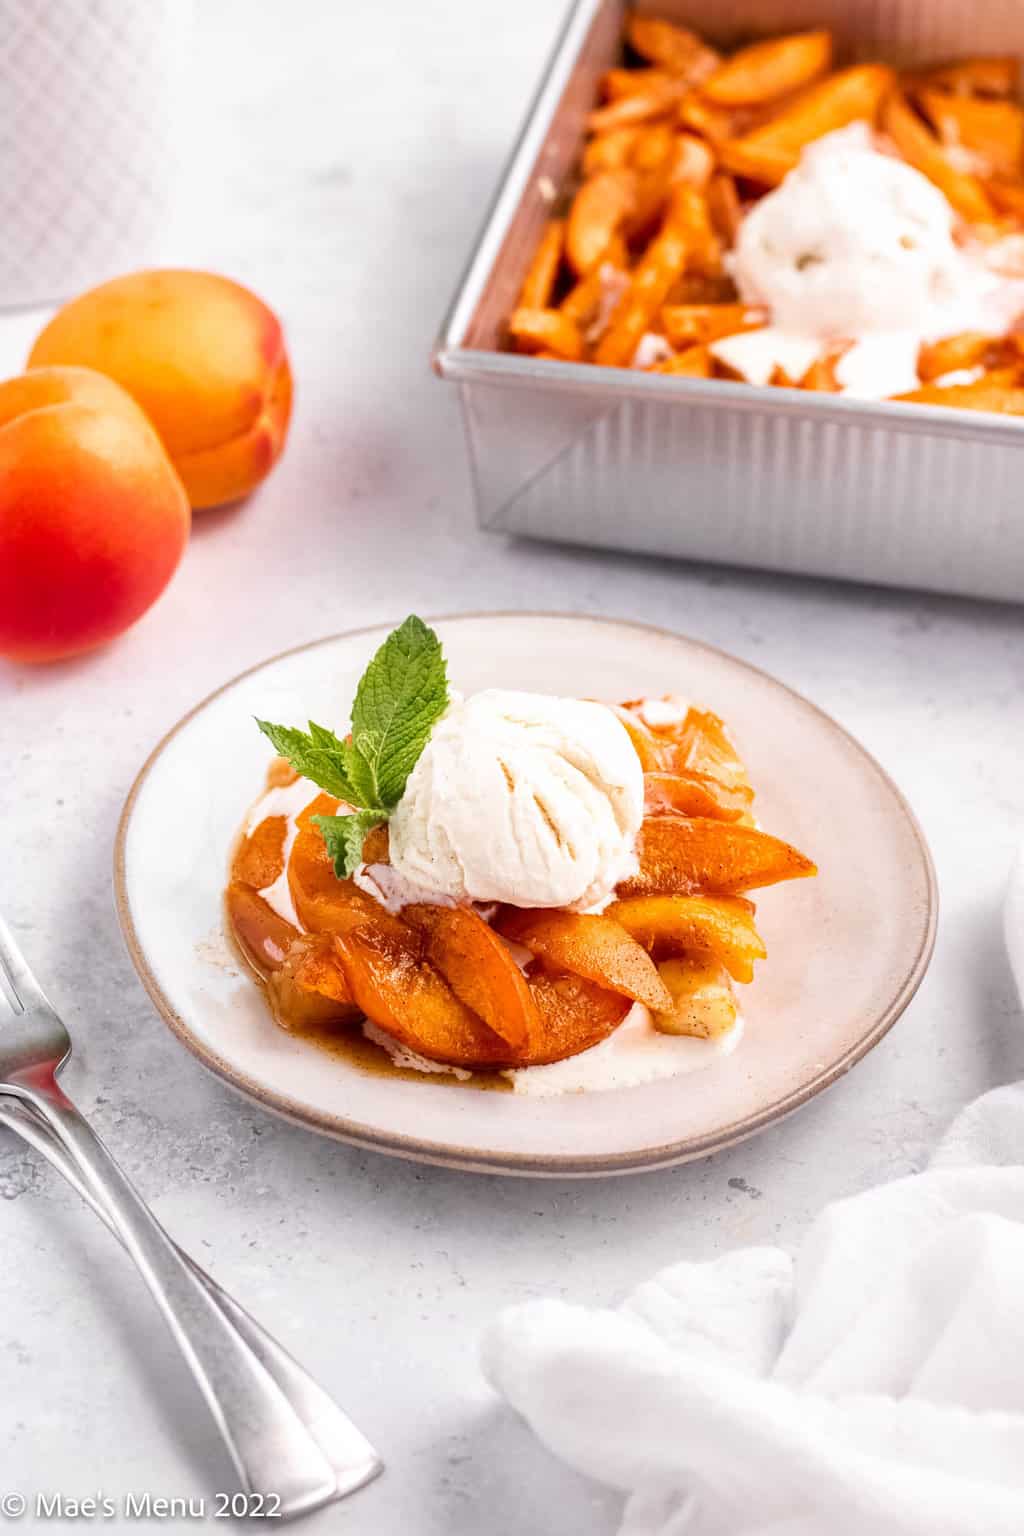 A small serving of apricot cobbler with ice cream and mint.